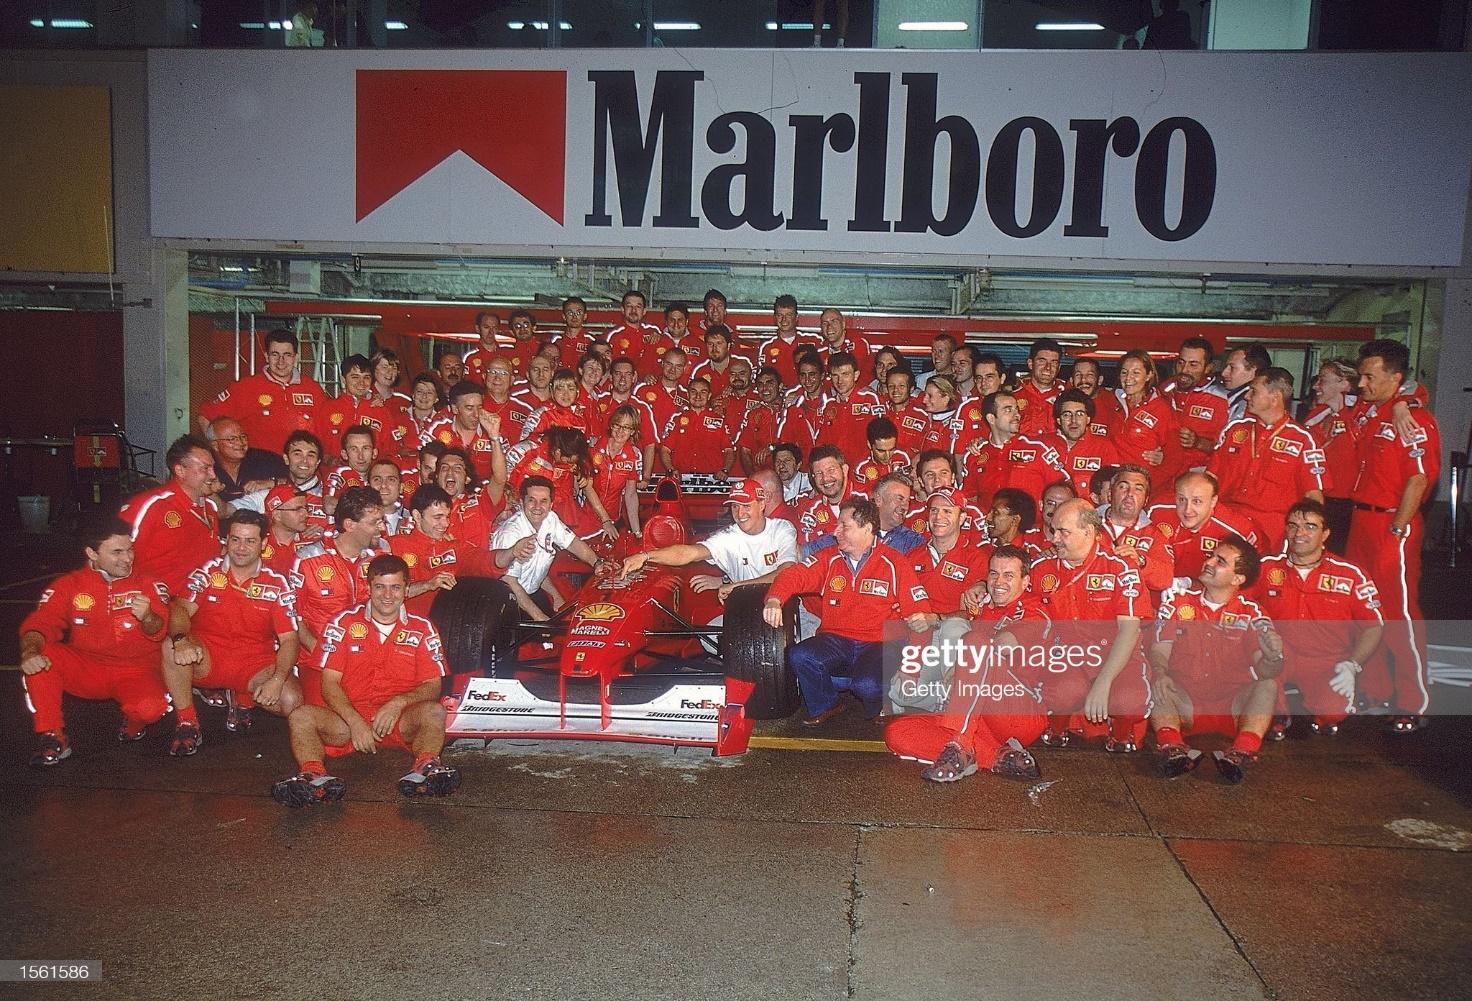 8 October 2000: Michael Schumacher and Rubens Barrichello celebrate with the rest of the Ferrari team after the Japanese F1 Grand Prix in Suzuka.